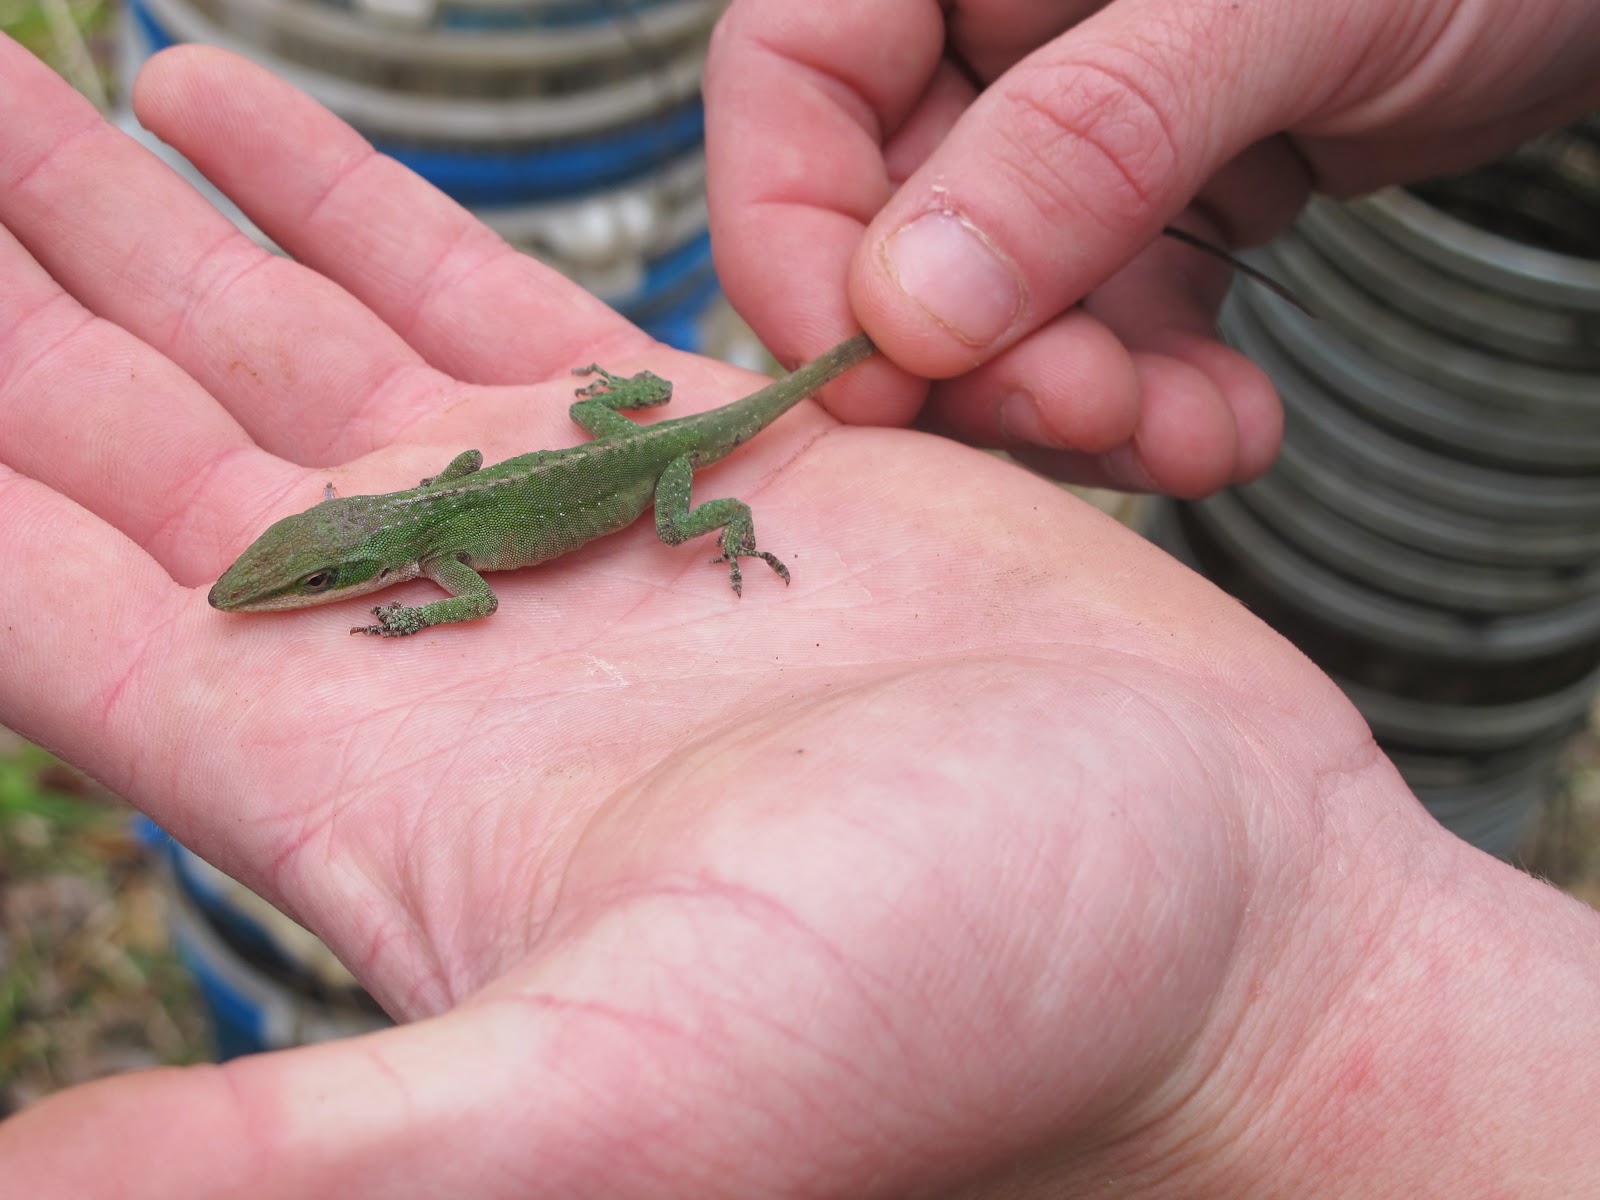 Our Herp Class: Natural History: The Dixie Carolina Anole